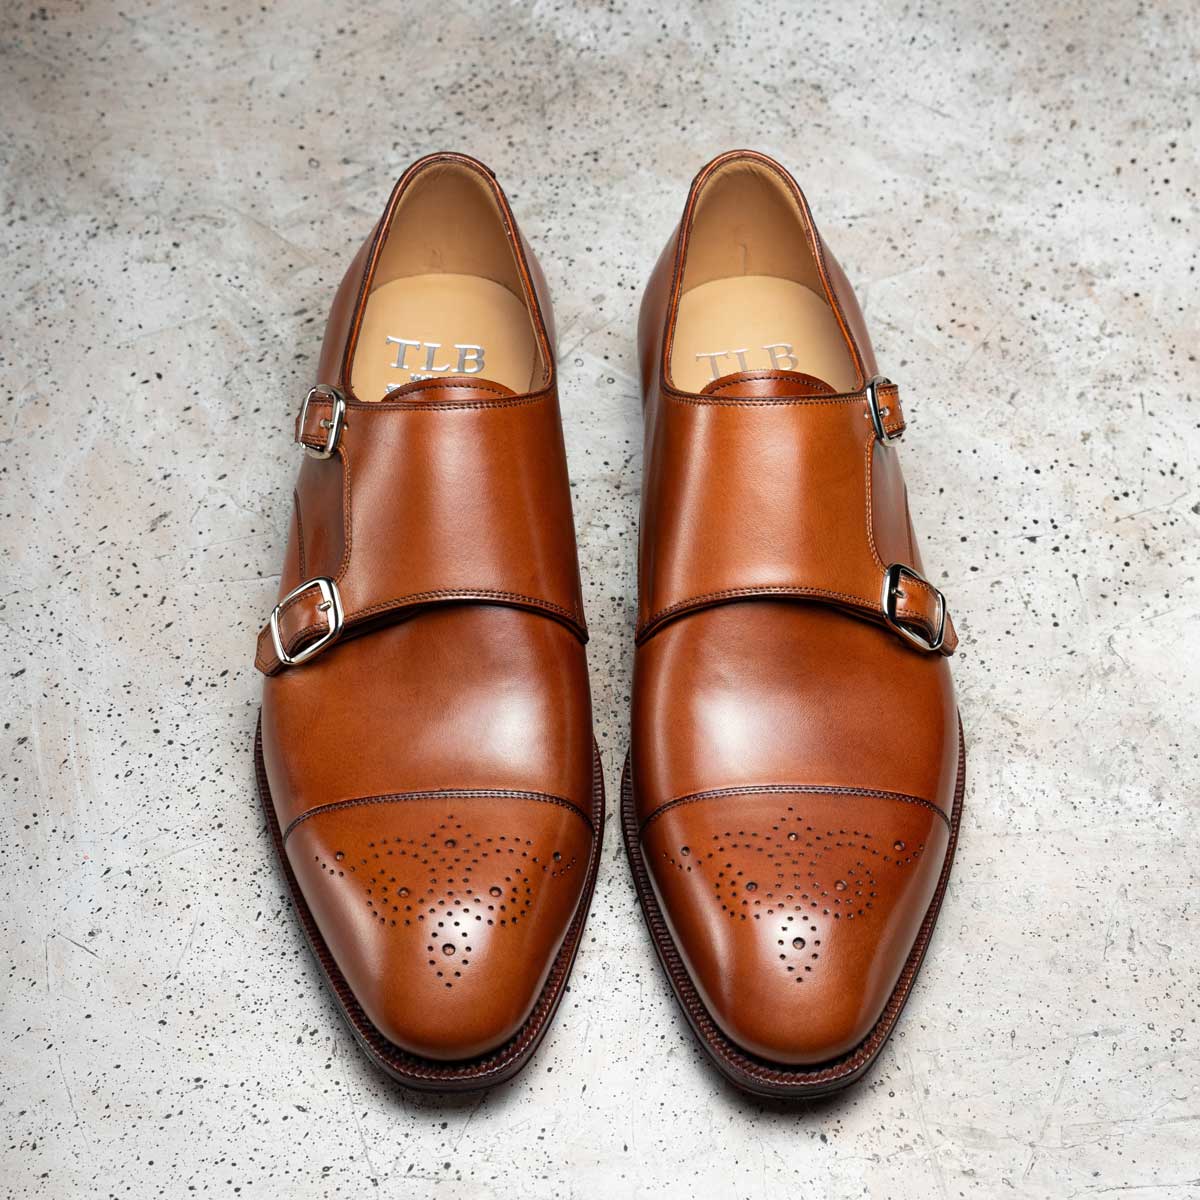 Classic meets contemporary with our Monk strap leather shoes in vegano light brown. 
Discover our MTO model 249, Goya last, in vegano light brown. Visit our collections at tlbmallorca.com

#tlbmallorca #menshoes #classic #mensfashion #luxuryshoes #shoemaker